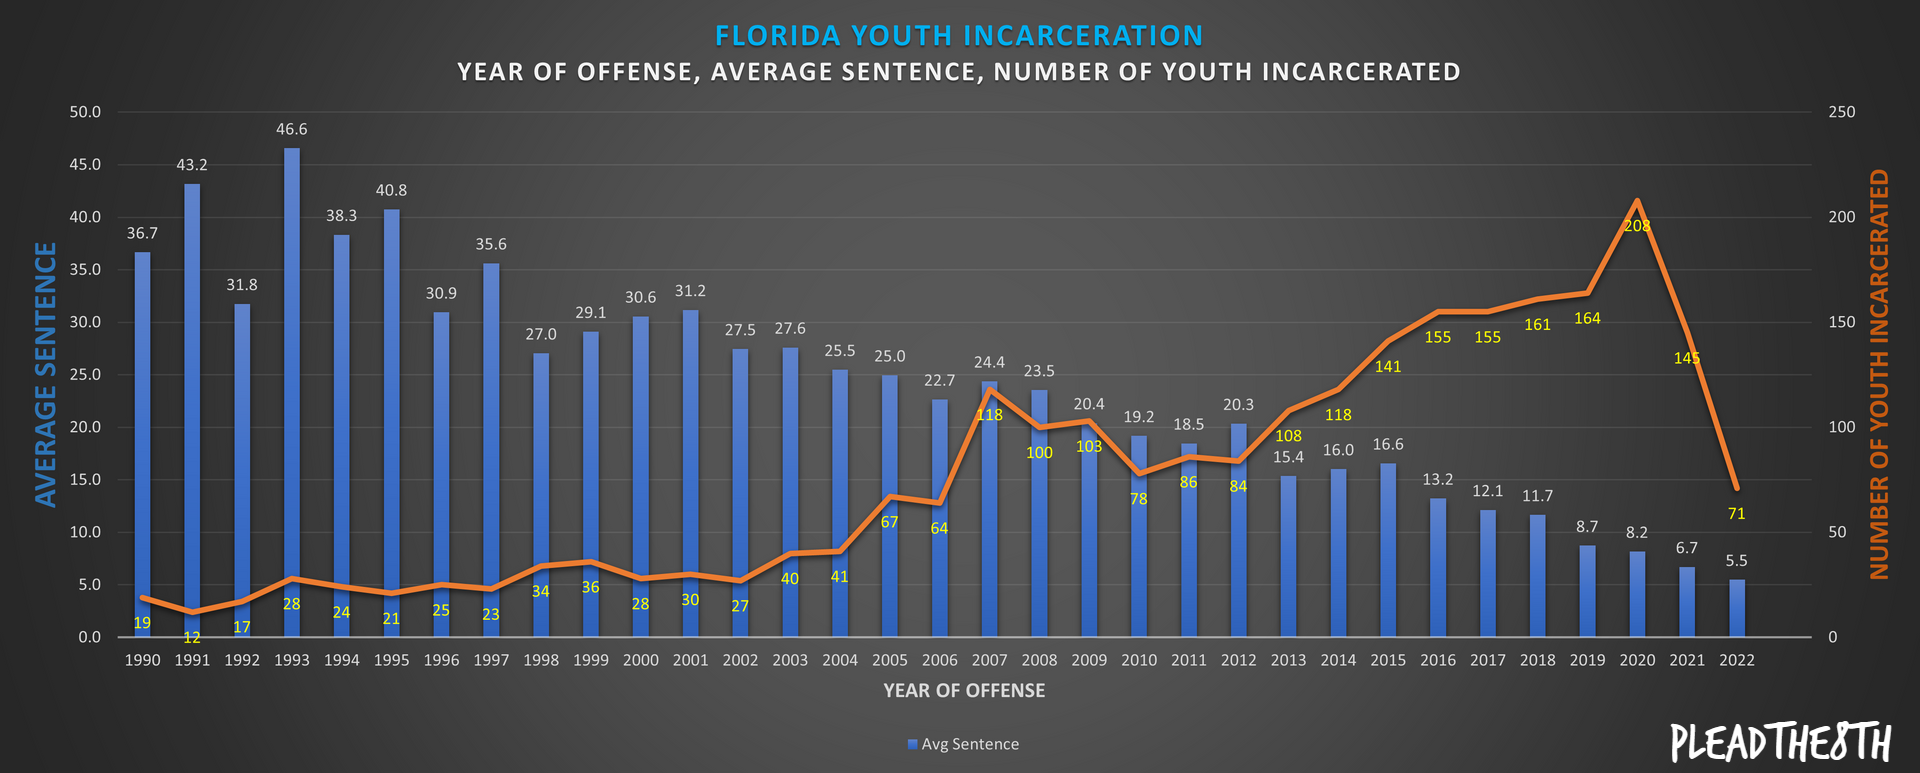 This chart provides a look at the number of Florida youths currently incarcerated by the year of offense in orange, compared to the average sentence by year of offense in blue.